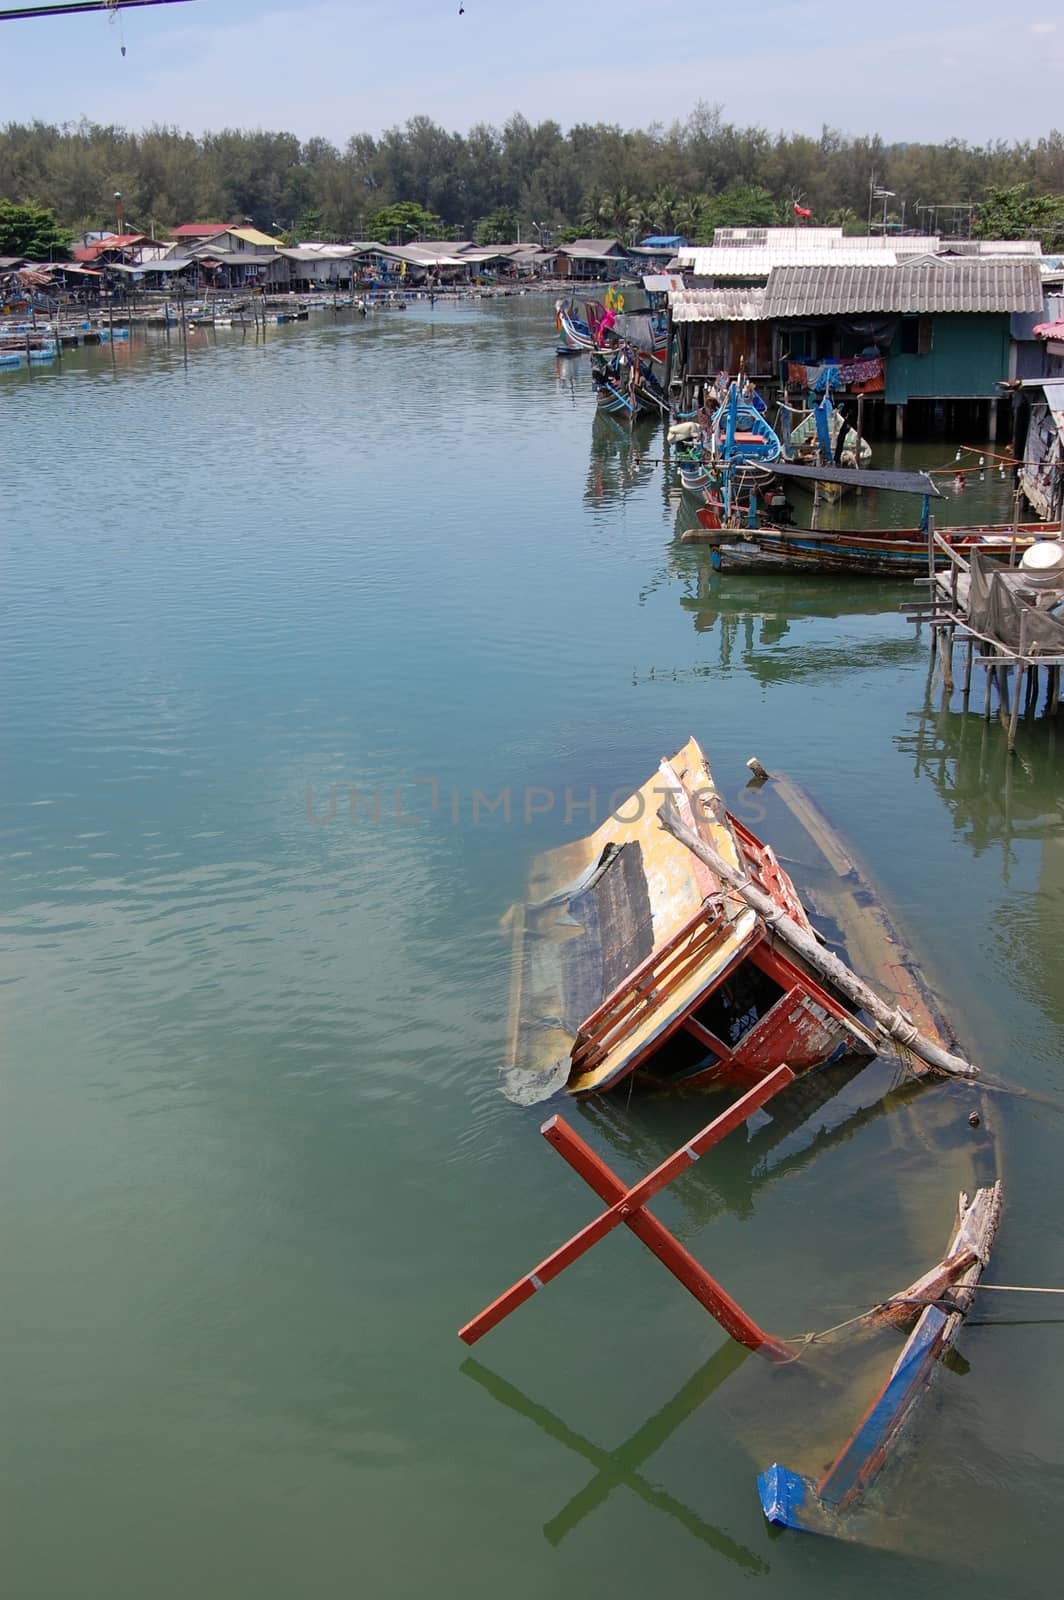 Abandoned sinked boat at river Thailand by danemo